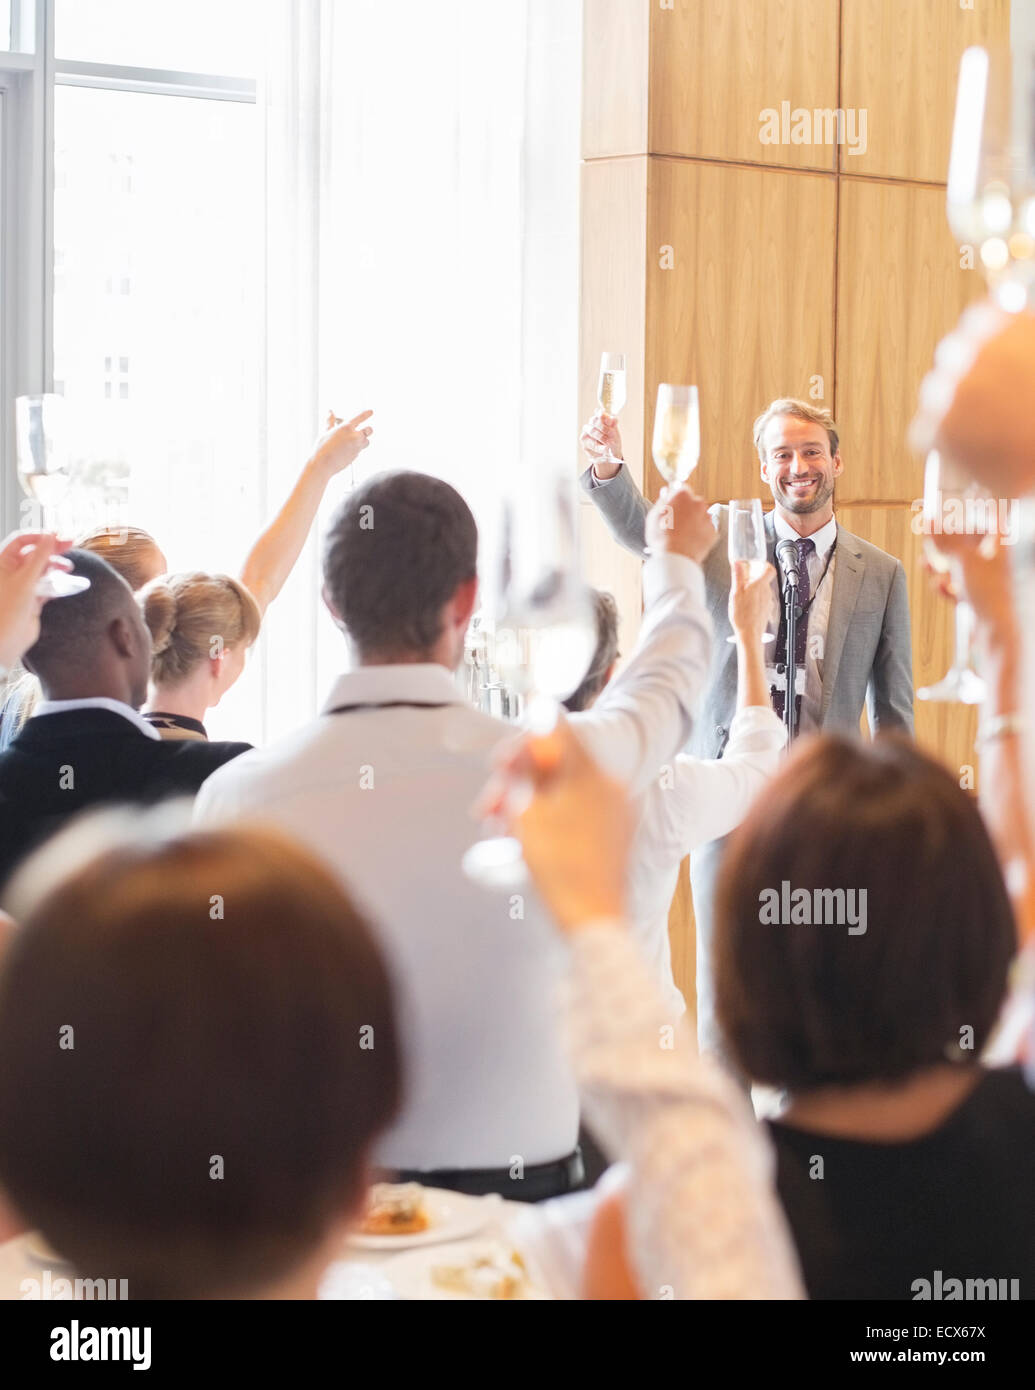 Portrait of smiling man standing before audience in conference room, raising toast with champagne flute Stock Photo